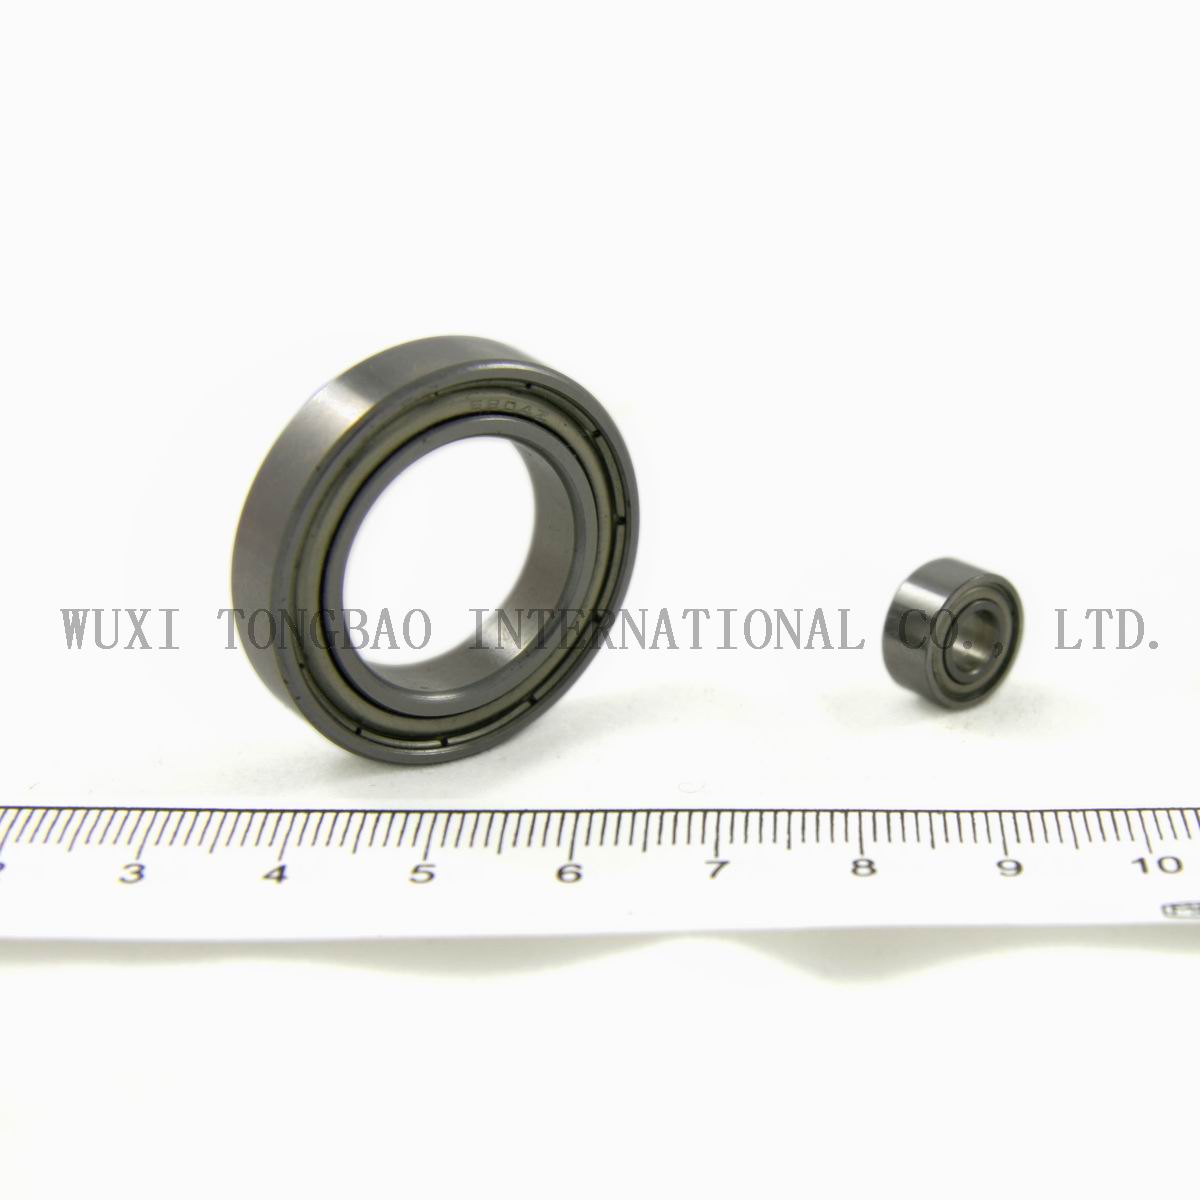 Quality Inspection for Self-Aligning Bearing - Really Precision Angular Contact high speed Ball Bearing – Tongbao